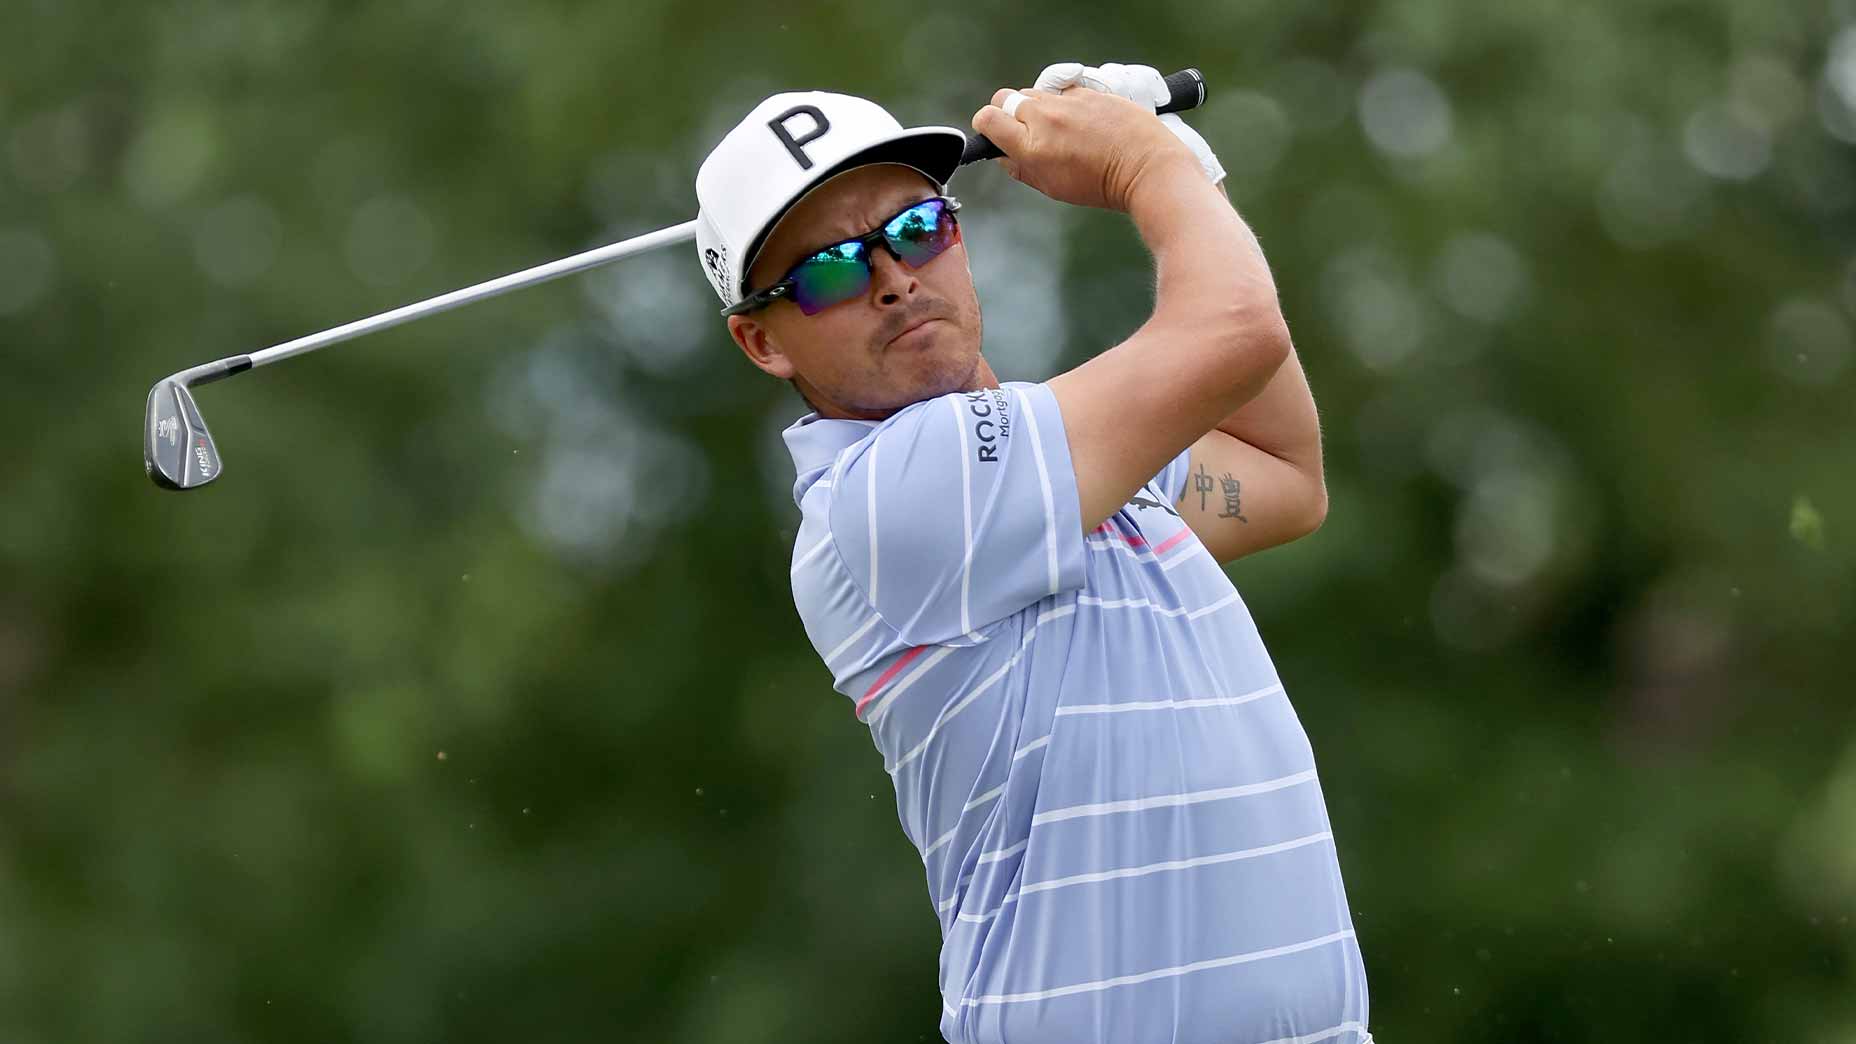 Wyndham Championship expert picks Who an expert (and golf fans) are